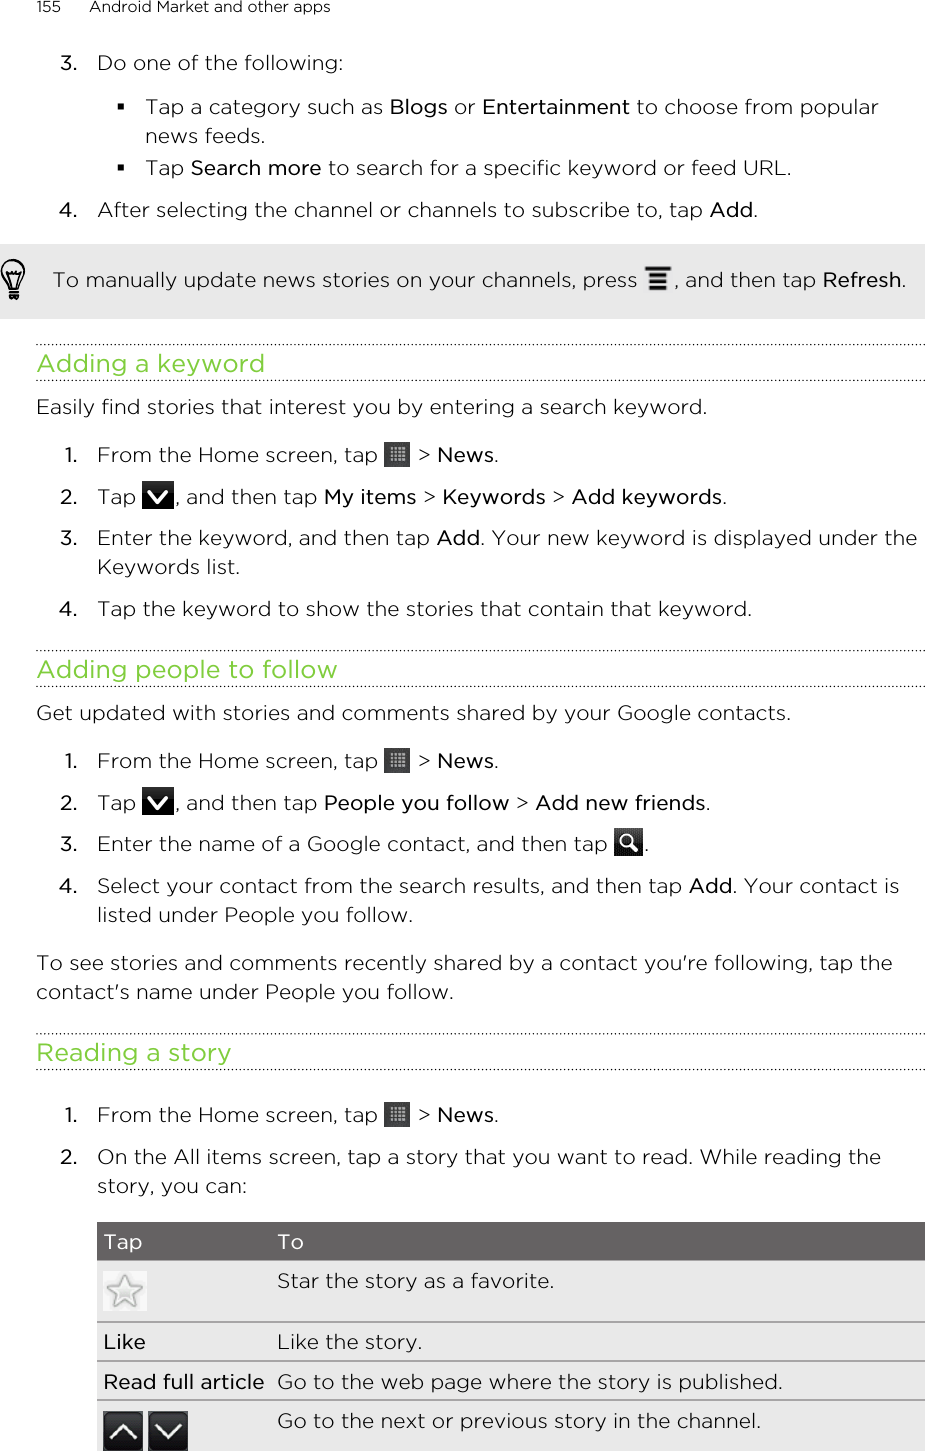 3. Do one of the following:§Tap a category such as Blogs or Entertainment to choose from popularnews feeds.§Tap Search more to search for a specific keyword or feed URL.4. After selecting the channel or channels to subscribe to, tap Add.To manually update news stories on your channels, press  , and then tap Refresh.Adding a keywordEasily find stories that interest you by entering a search keyword.1. From the Home screen, tap   &gt; News.2. Tap  , and then tap My items &gt; Keywords &gt; Add keywords.3. Enter the keyword, and then tap Add. Your new keyword is displayed under theKeywords list.4. Tap the keyword to show the stories that contain that keyword.Adding people to followGet updated with stories and comments shared by your Google contacts.1. From the Home screen, tap   &gt; News.2. Tap  , and then tap People you follow &gt; Add new friends.3. Enter the name of a Google contact, and then tap  .4. Select your contact from the search results, and then tap Add. Your contact islisted under People you follow.To see stories and comments recently shared by a contact you&apos;re following, tap thecontact&apos;s name under People you follow.Reading a story1. From the Home screen, tap   &gt; News.2. On the All items screen, tap a story that you want to read. While reading thestory, you can:Tap ToStar the story as a favorite.Like Like the story.Read full article Go to the web page where the story is published. Go to the next or previous story in the channel.155 Android Market and other apps